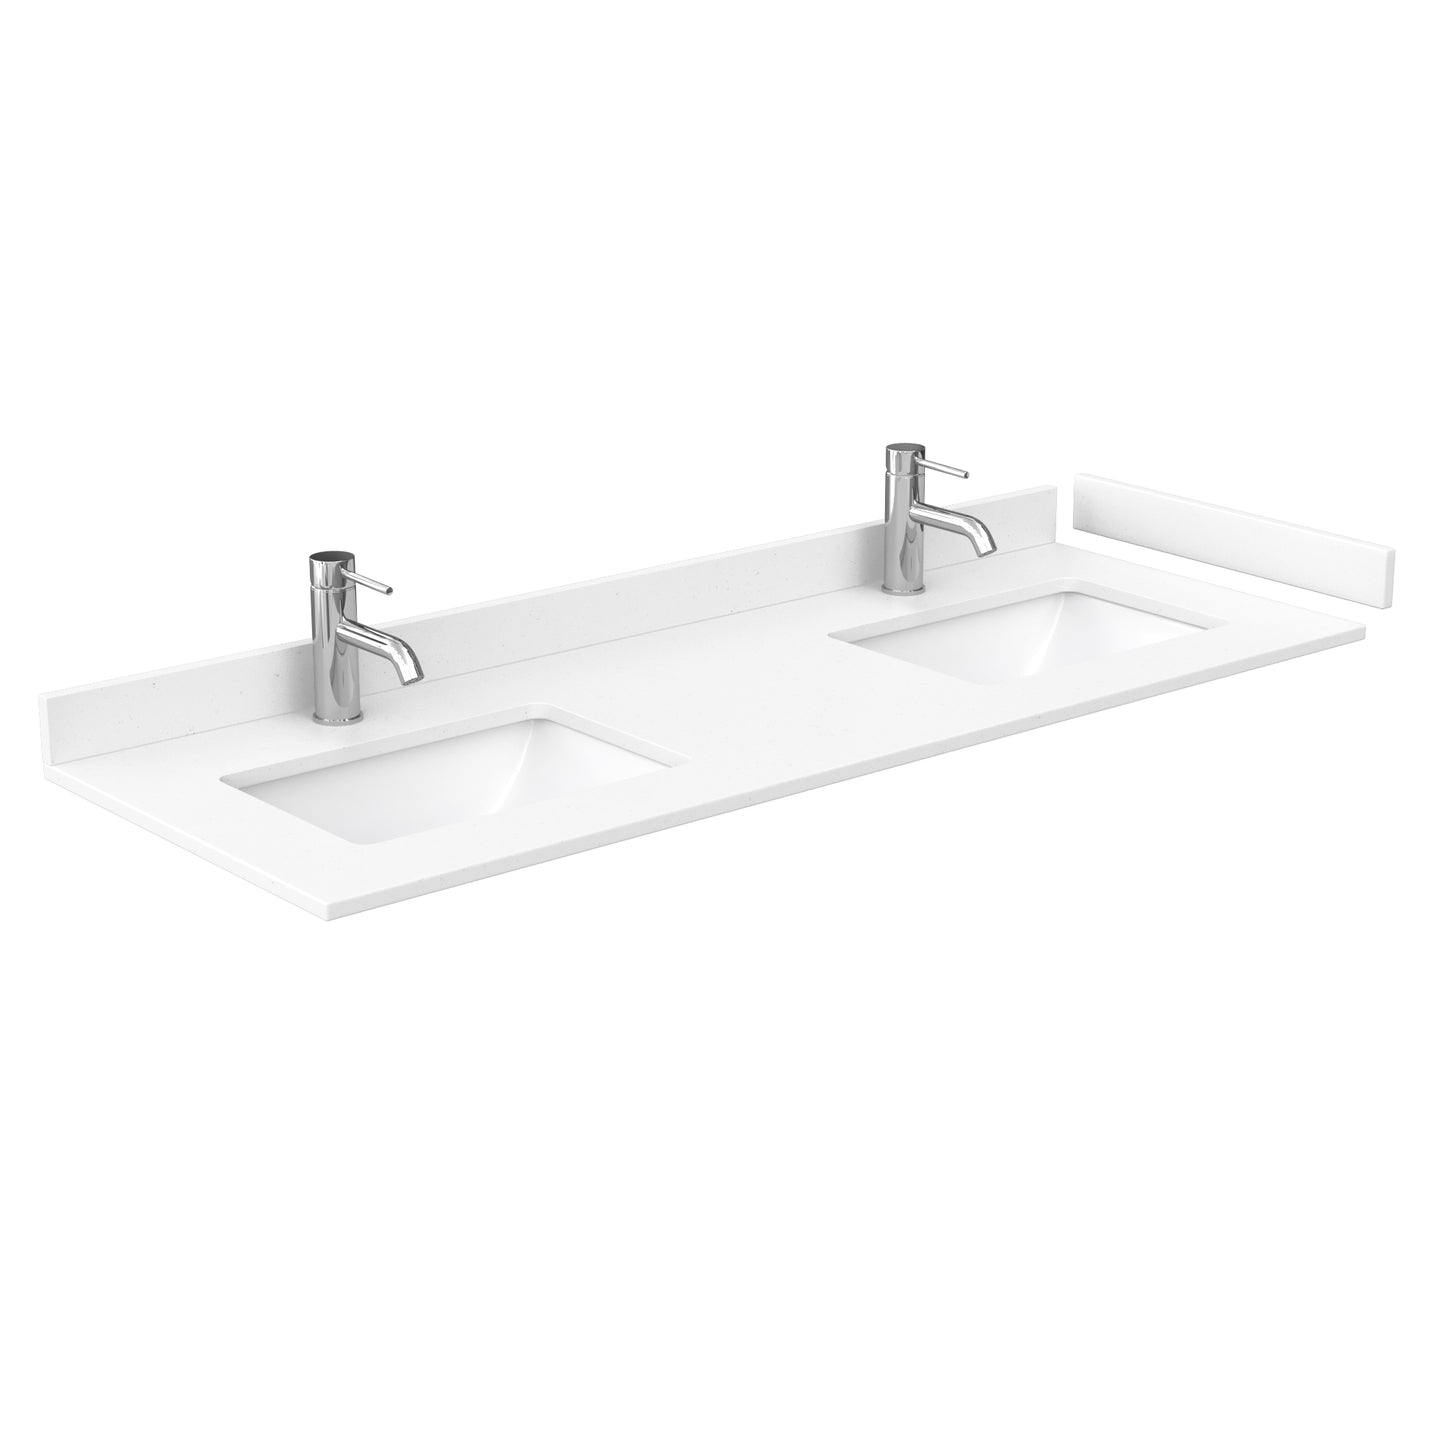 Wyndham Avery 60 Inch Double Bathroom Vanity White Cultured Marble Countertop, Undermount Square Sinks in Matte Black Trim with 58 Inch Mirror - Luxe Bathroom Vanities